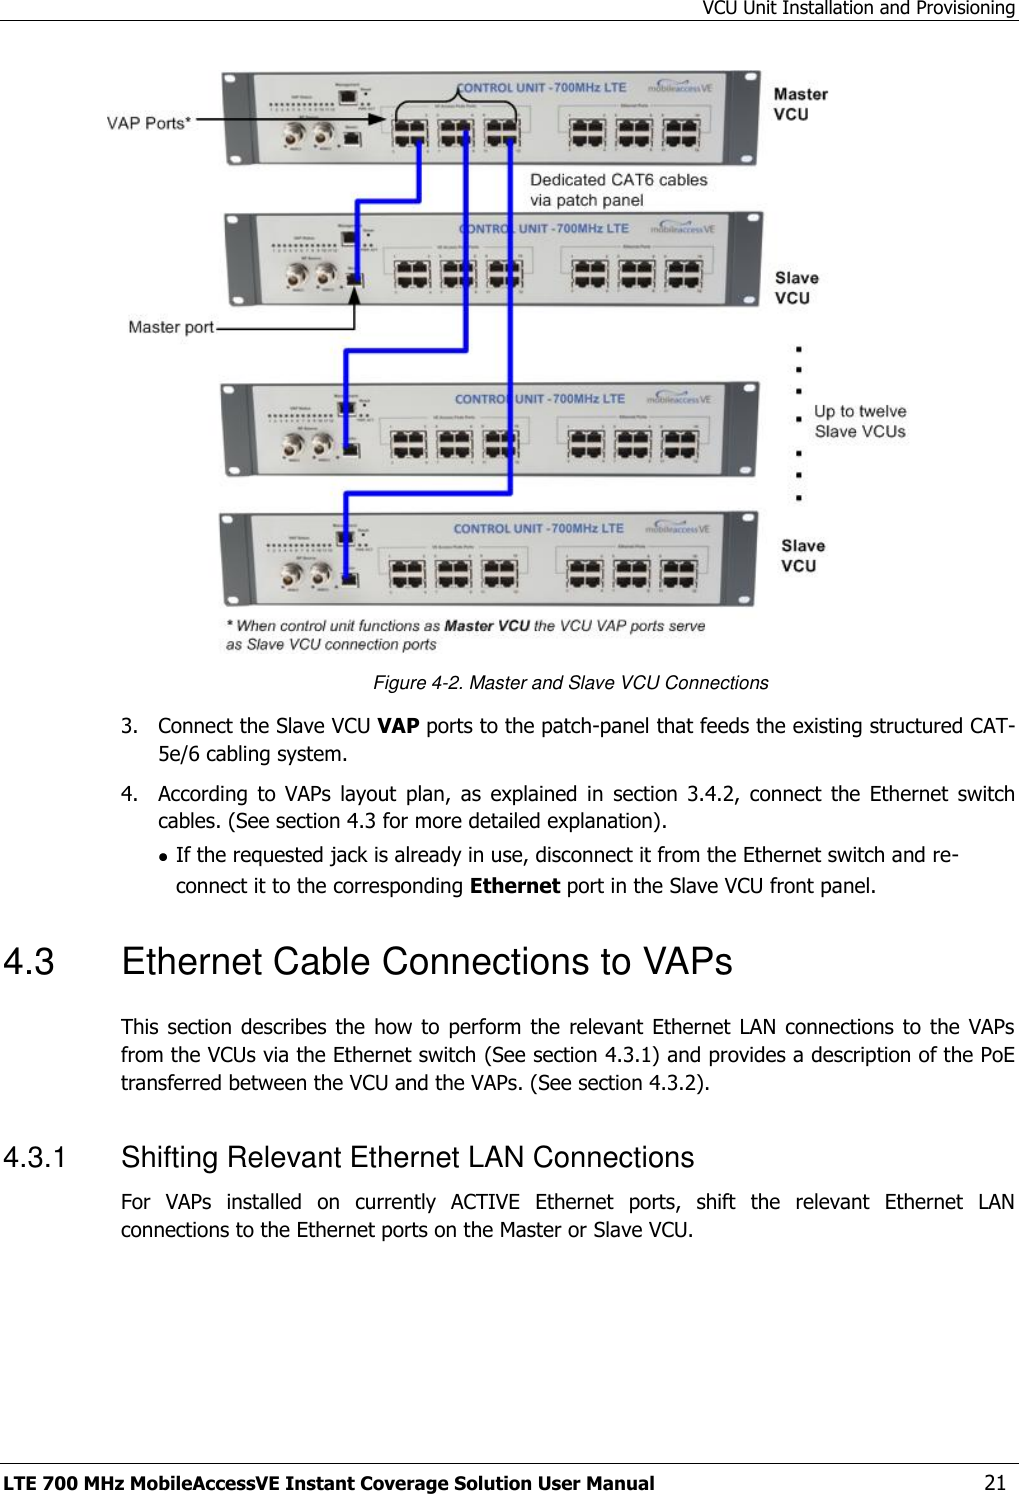 VCU Unit Installation and Provisioning LTE 700 MHz MobileAccessVE Instant Coverage Solution User Manual  21  Figure 4-2. Master and Slave VCU Connections 3.  Connect the Slave VCU VAP ports to the patch-panel that feeds the existing structured CAT-5e/6 cabling system. 4.  According  to  VAPs  layout  plan,  as  explained  in  section  3.4.2,  connect  the  Ethernet  switch cables. (See section 4.3 for more detailed explanation).  If the requested jack is already in use, disconnect it from the Ethernet switch and re-connect it to the corresponding Ethernet port in the Slave VCU front panel. 4.3  Ethernet Cable Connections to VAPs This section describes the  how  to perform  the  relevant  Ethernet LAN  connections  to the VAPs from the VCUs via the Ethernet switch (See section 4.3.1) and provides a description of the PoE transferred between the VCU and the VAPs. (See section 4.3.2). 4.3.1  Shifting Relevant Ethernet LAN Connections For  VAPs  installed  on  currently  ACTIVE  Ethernet  ports,  shift  the  relevant  Ethernet  LAN connections to the Ethernet ports on the Master or Slave VCU. 